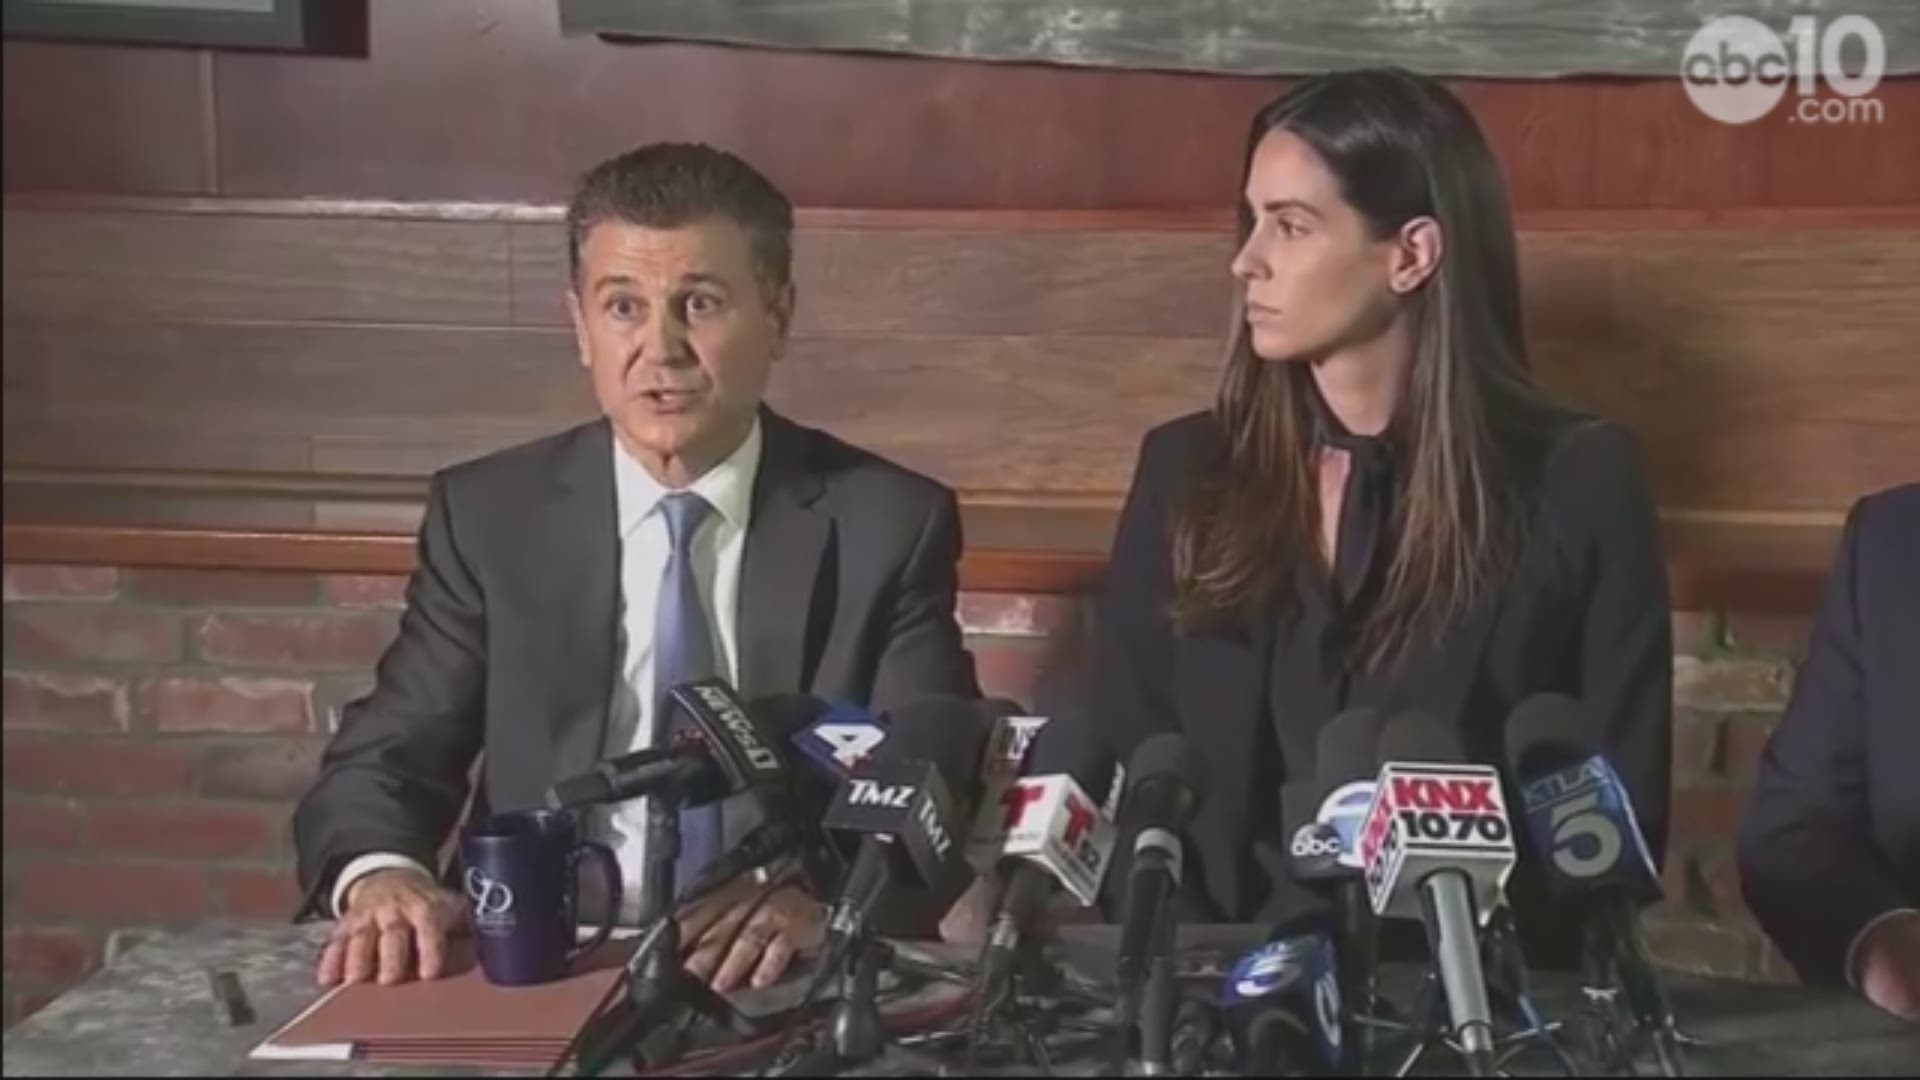 Kelli Tennant and her lawyer Garo Mardirossian have a press conference after filing a lawsuit for an alleged sexual assault.